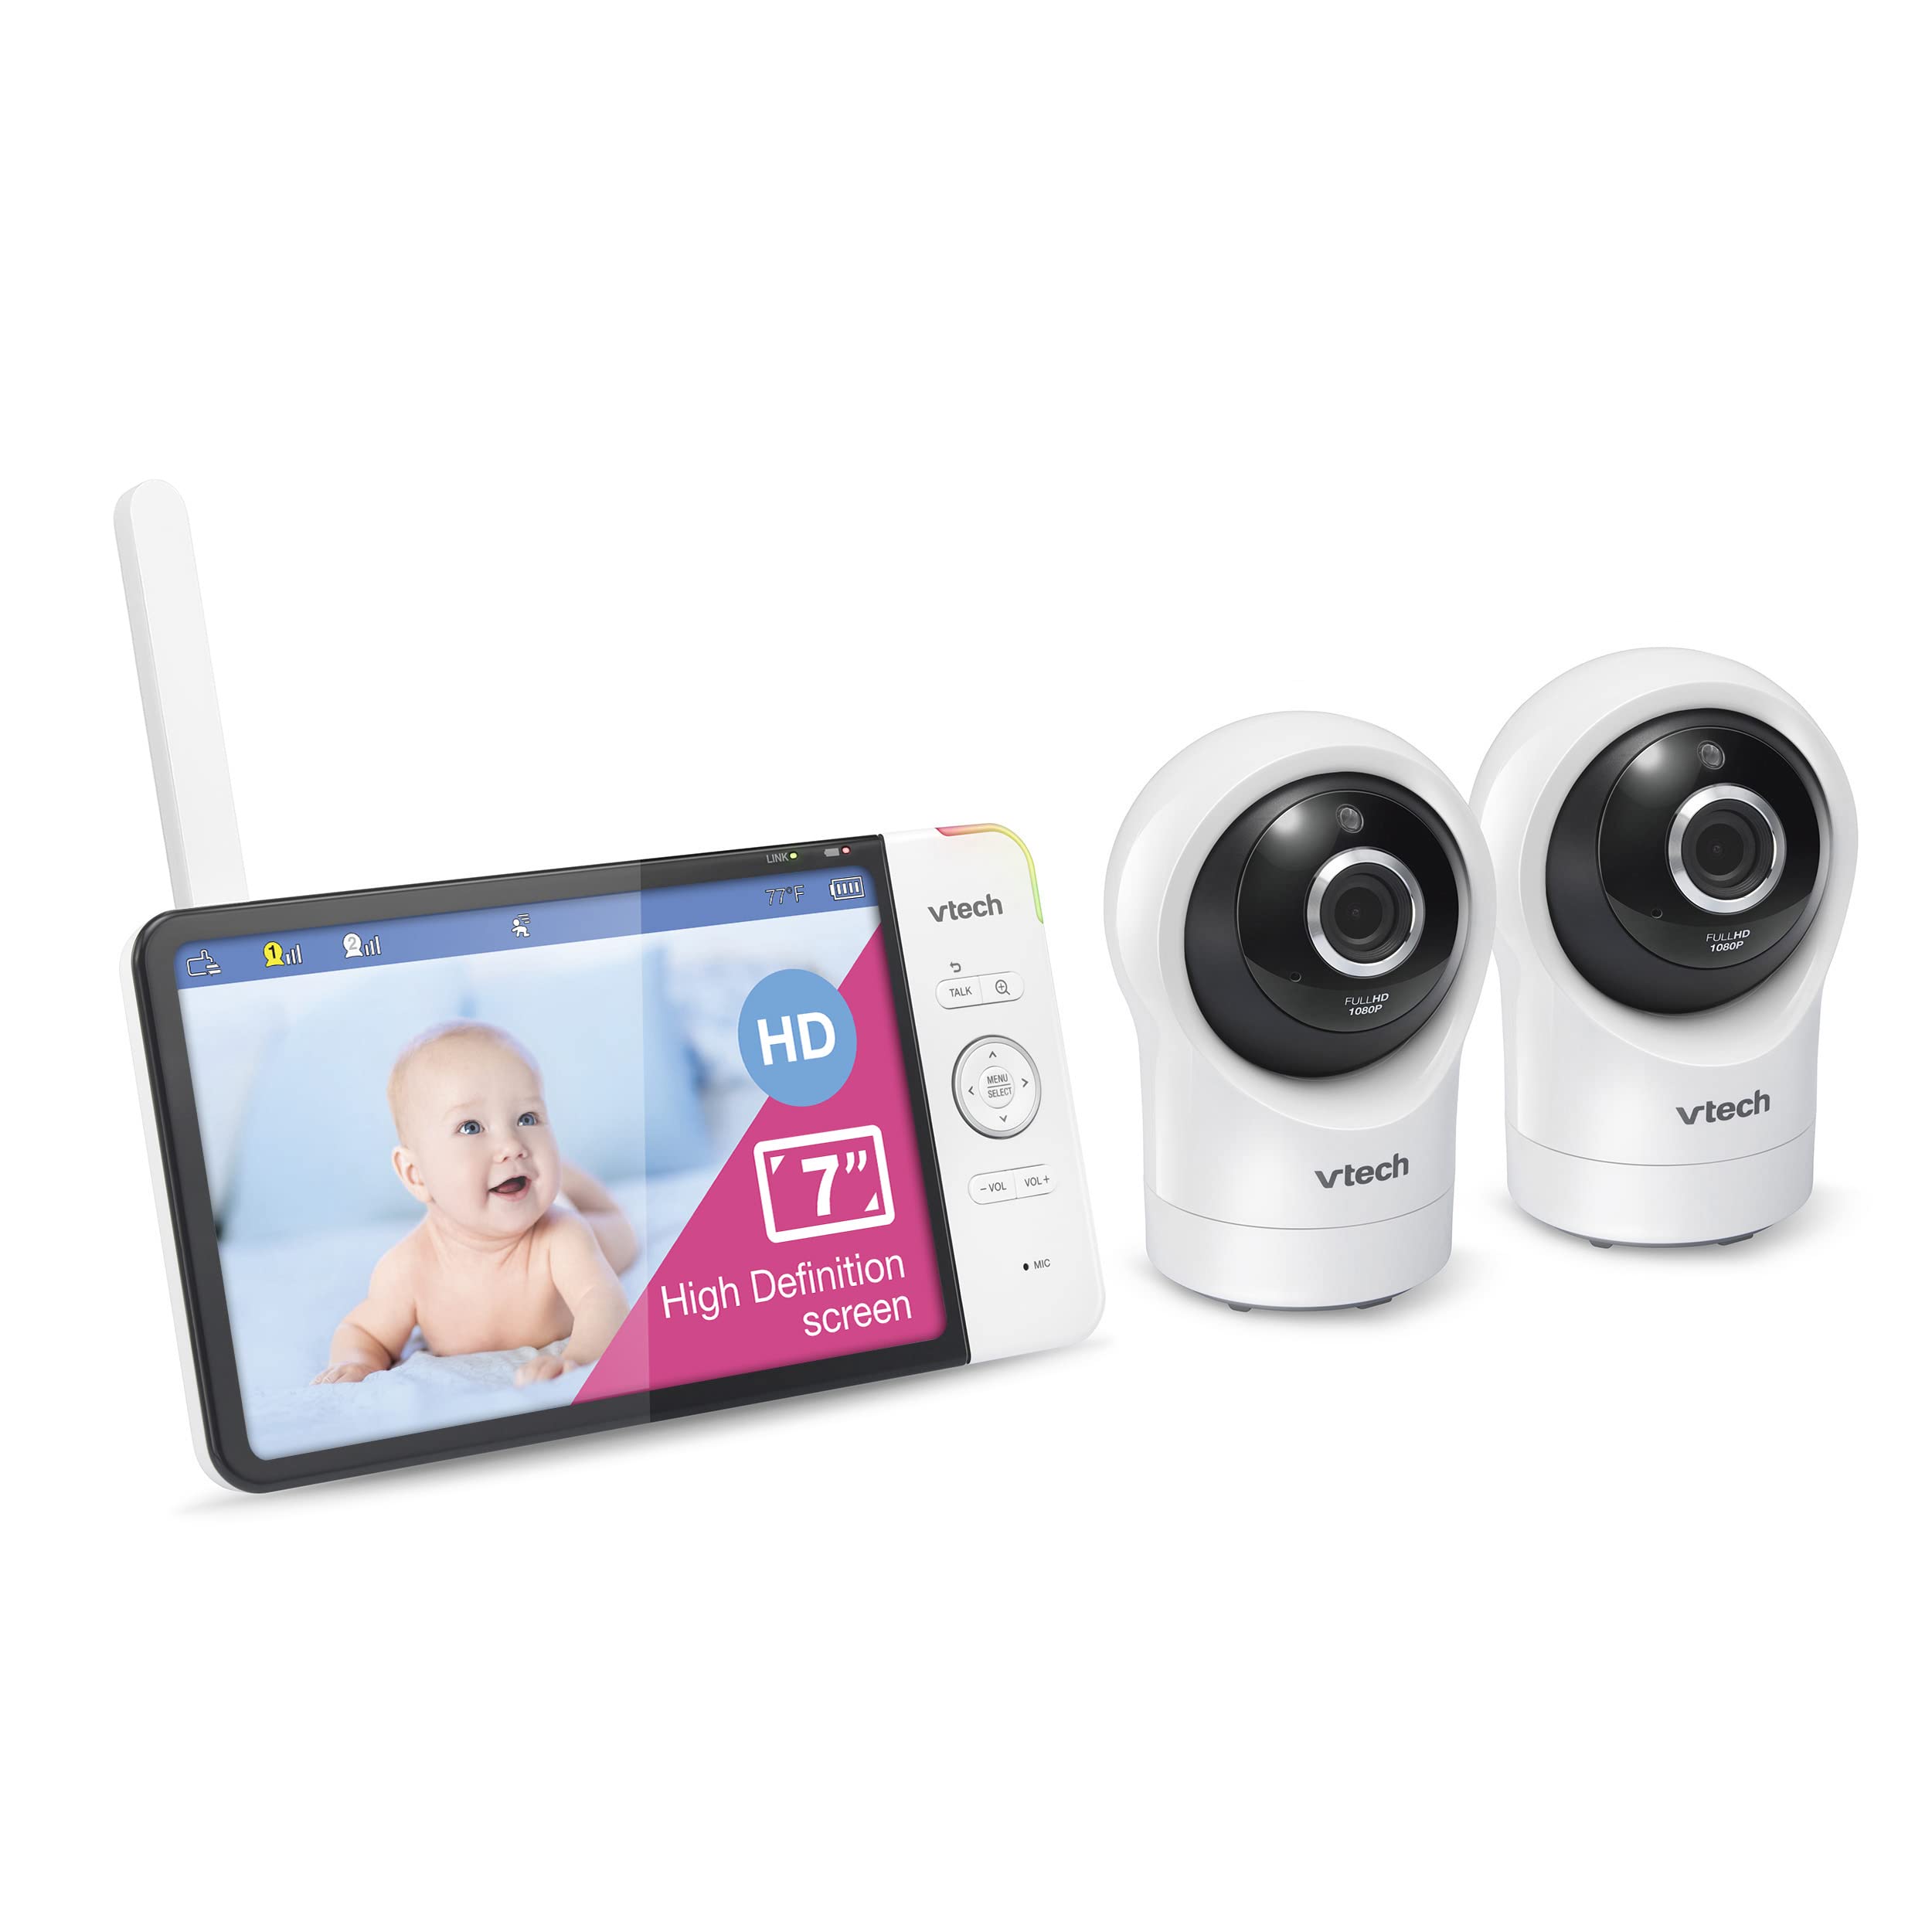 VTech RM7764-2HD 1080p Smart WiFi Remote Access 2Camera BabyMonitor, 360° Pan&Tilt, 10X Zoom, 7” 720p HD Display, HD NightVision, Soothing Sounds, 2-Way Talk, Temperature&Motion Detection, iOS&Android